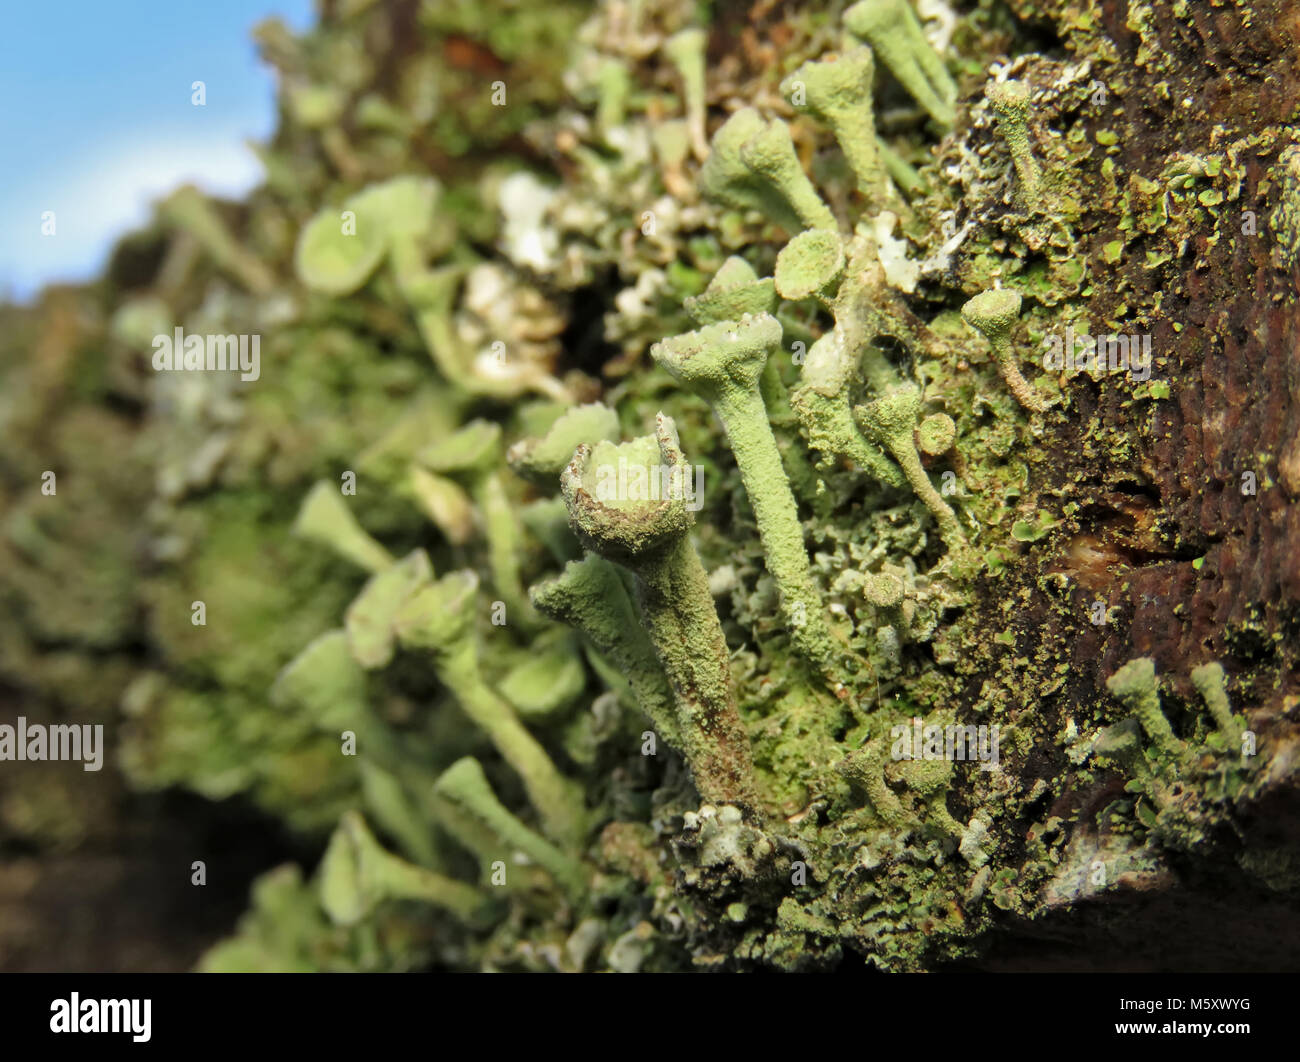 Scores of Cladonia sp. lichens growing on a wooden fence in Washington state Stock Photo